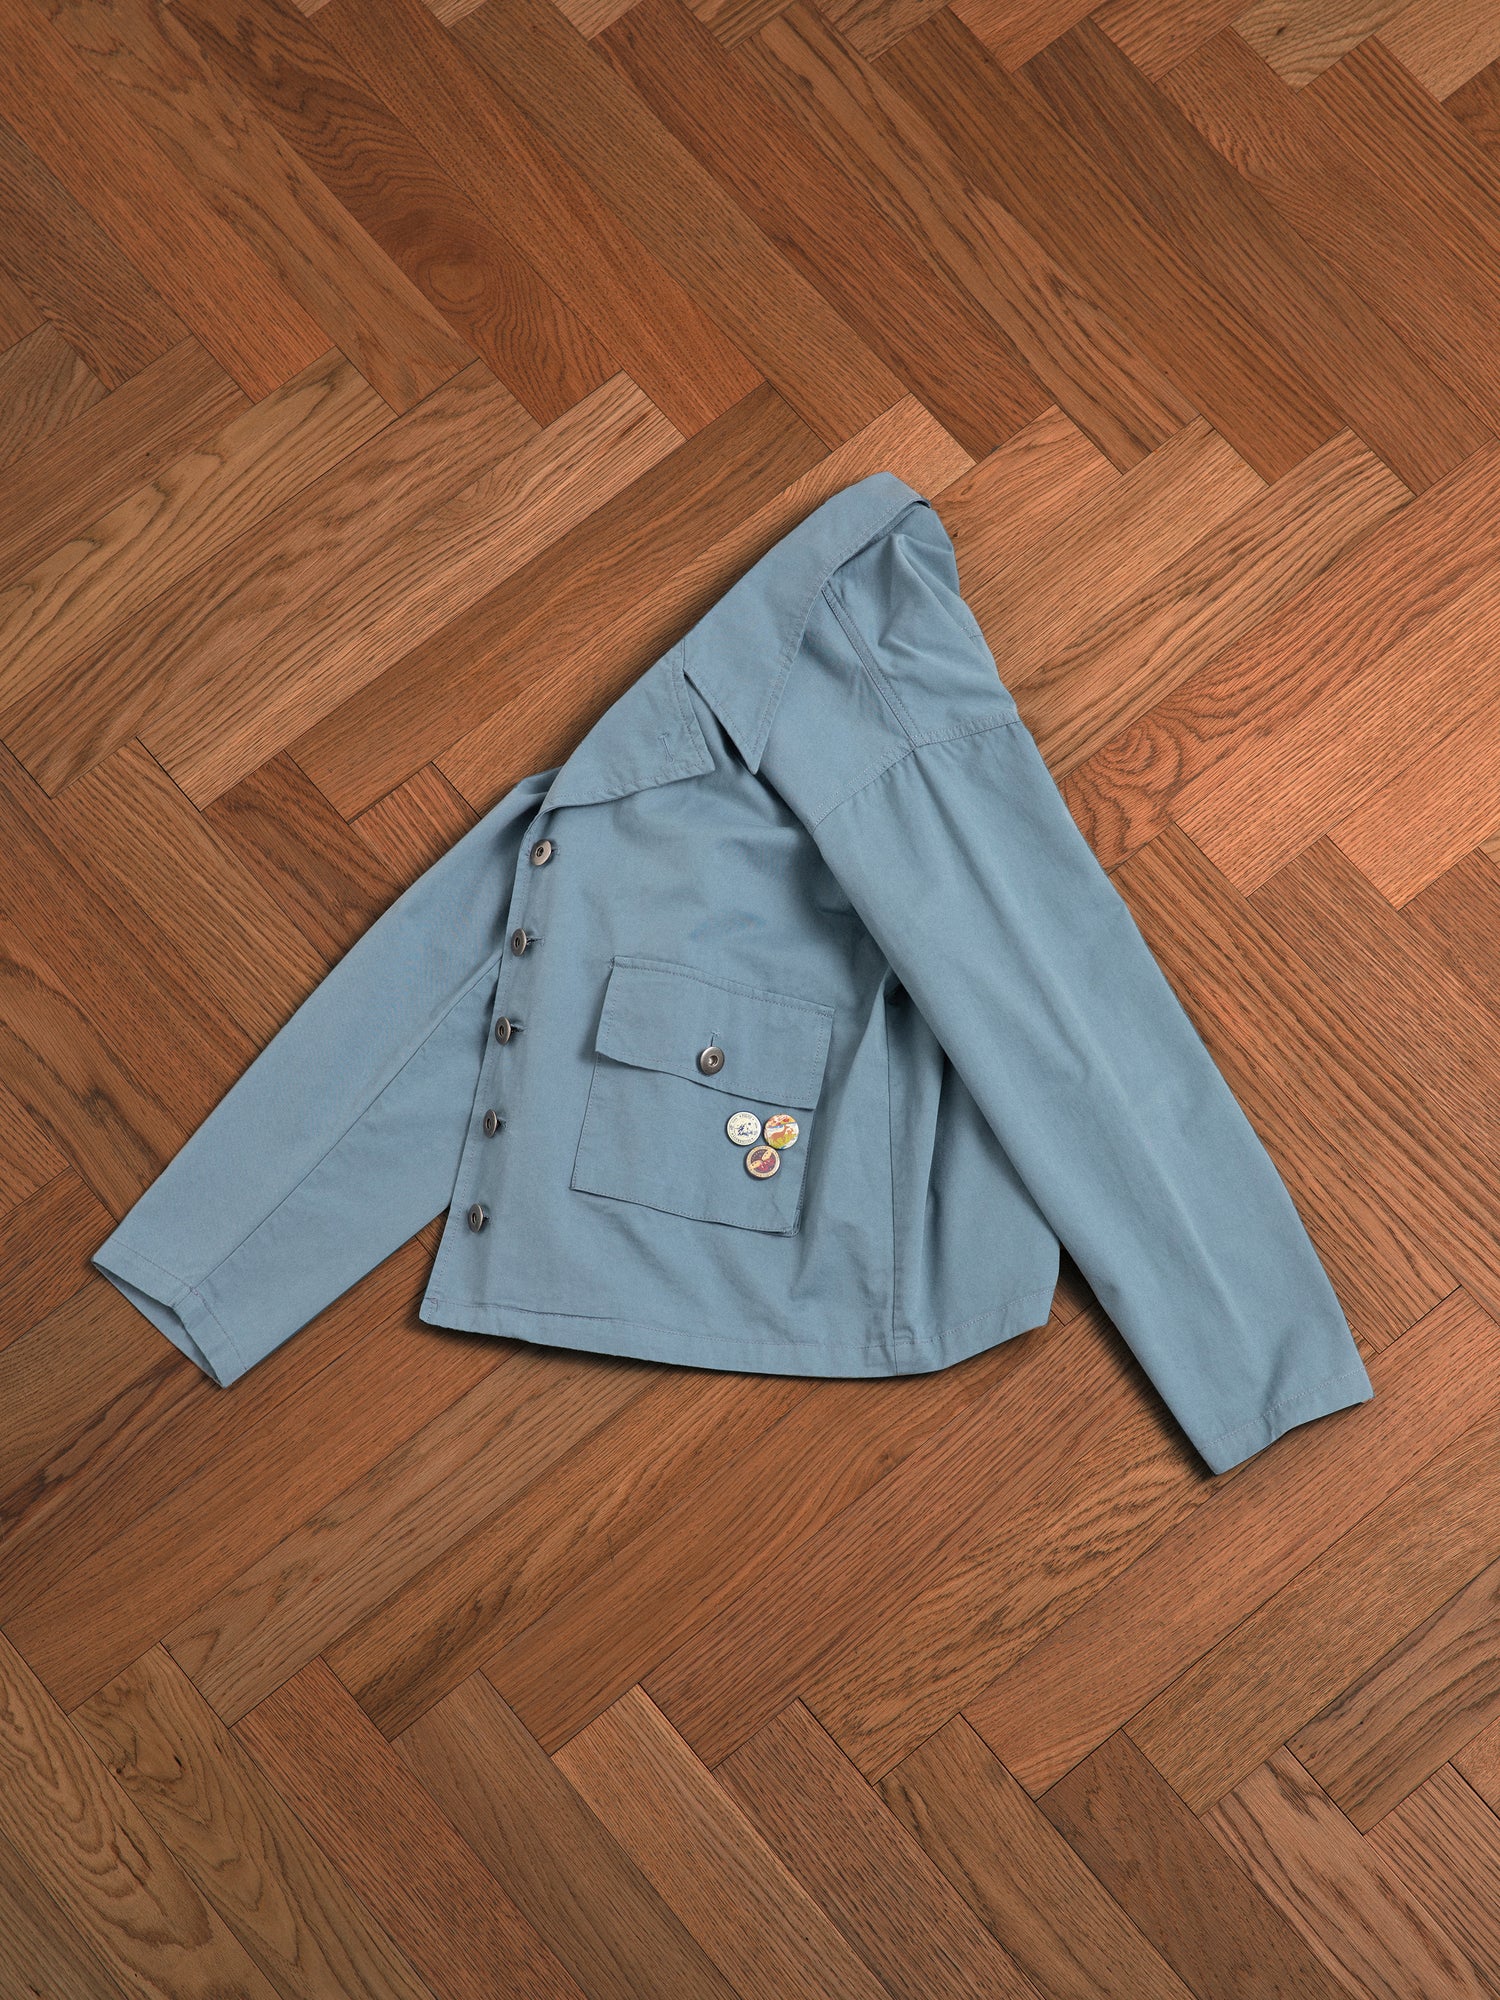 A vintage Found Patina Work Jacket laying on a wooden floor.